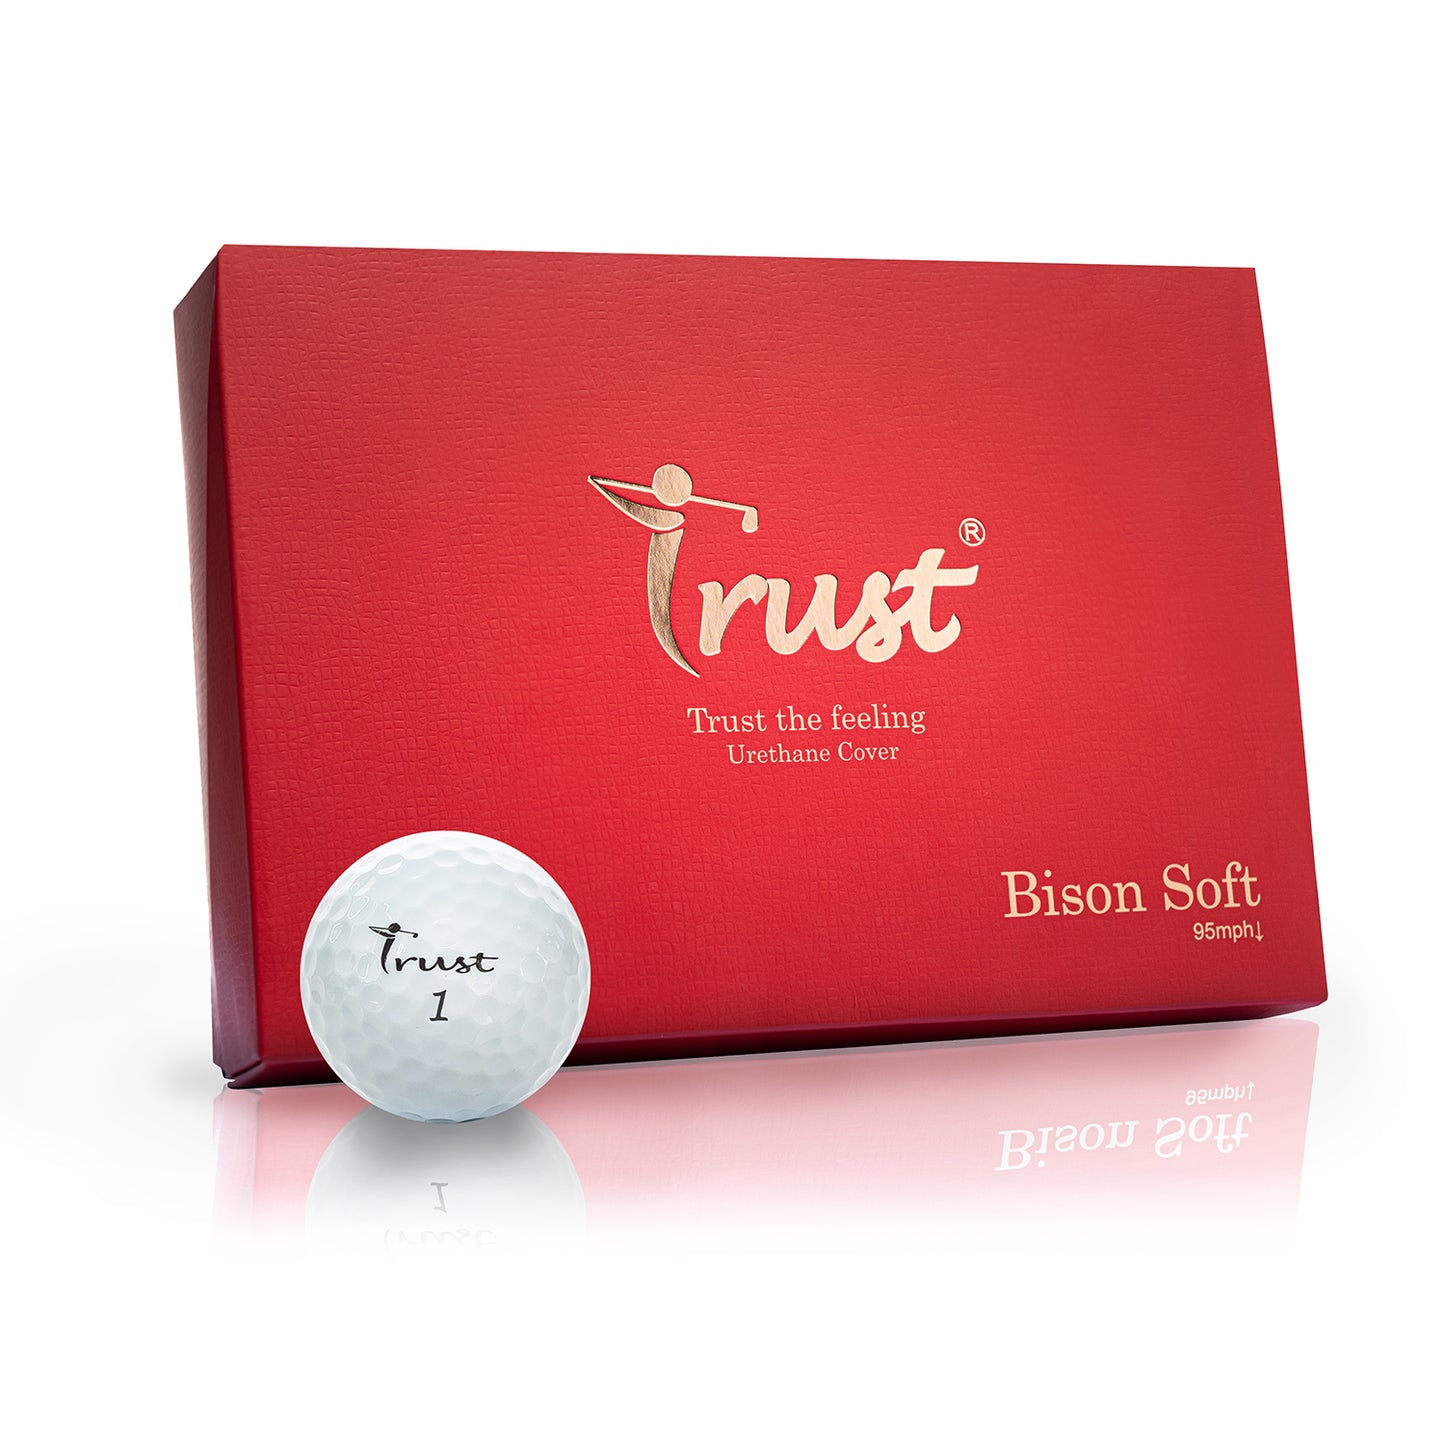 Bison Soft - 1 lusin - Select by Your Swing Speed - Trust Golf Indonesia